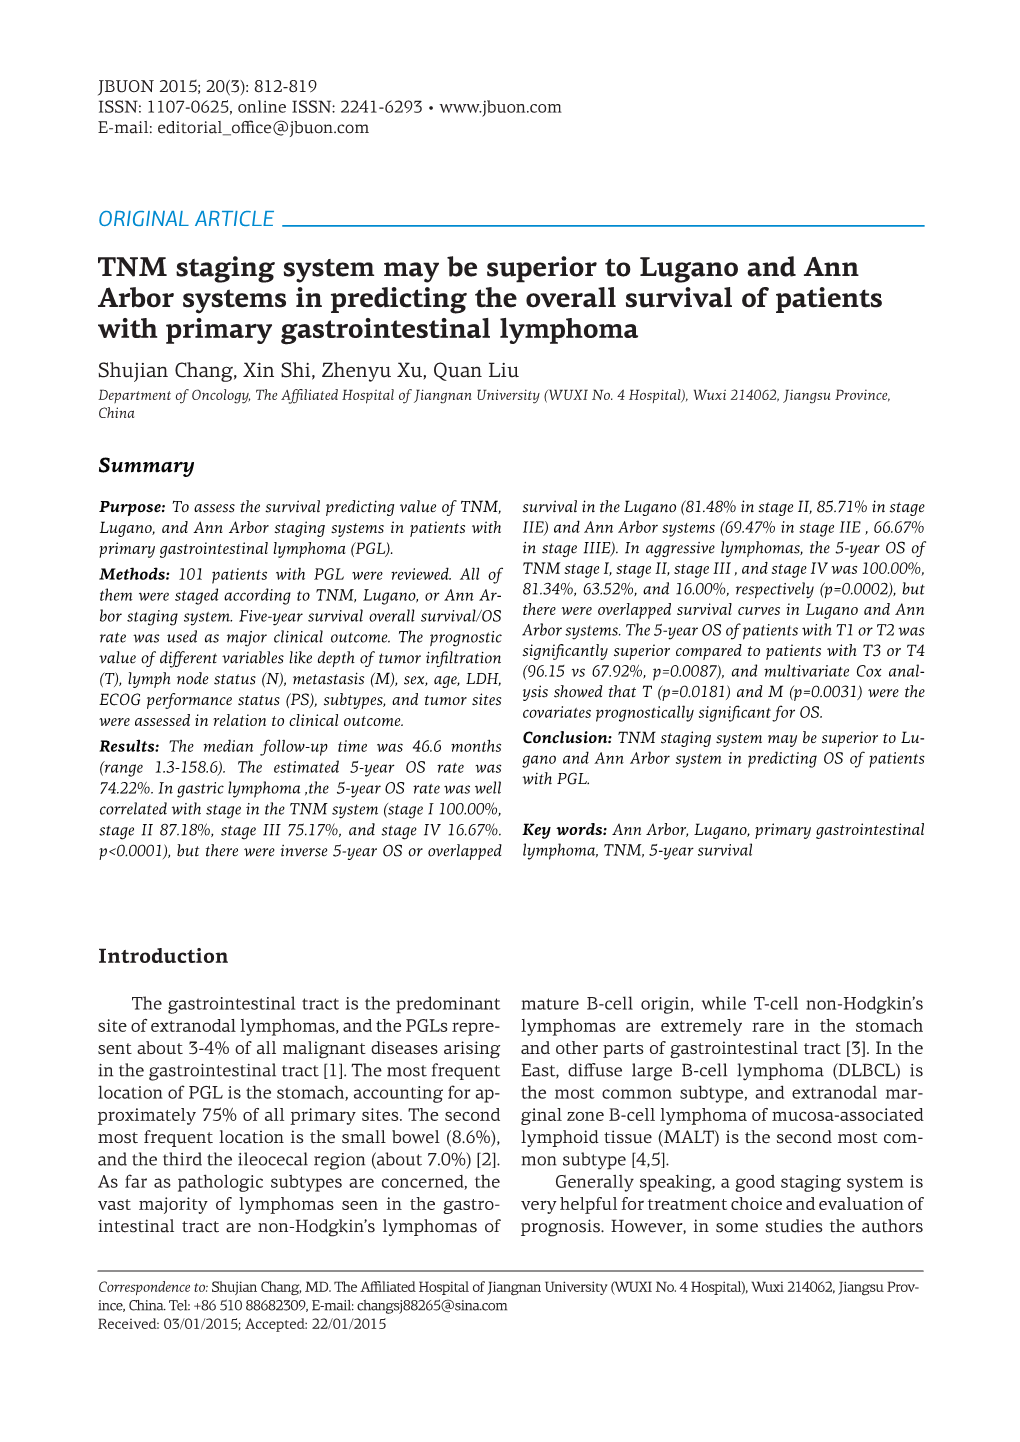 TNM Staging System May Be Superior to Lugano and Ann Arbor Systems